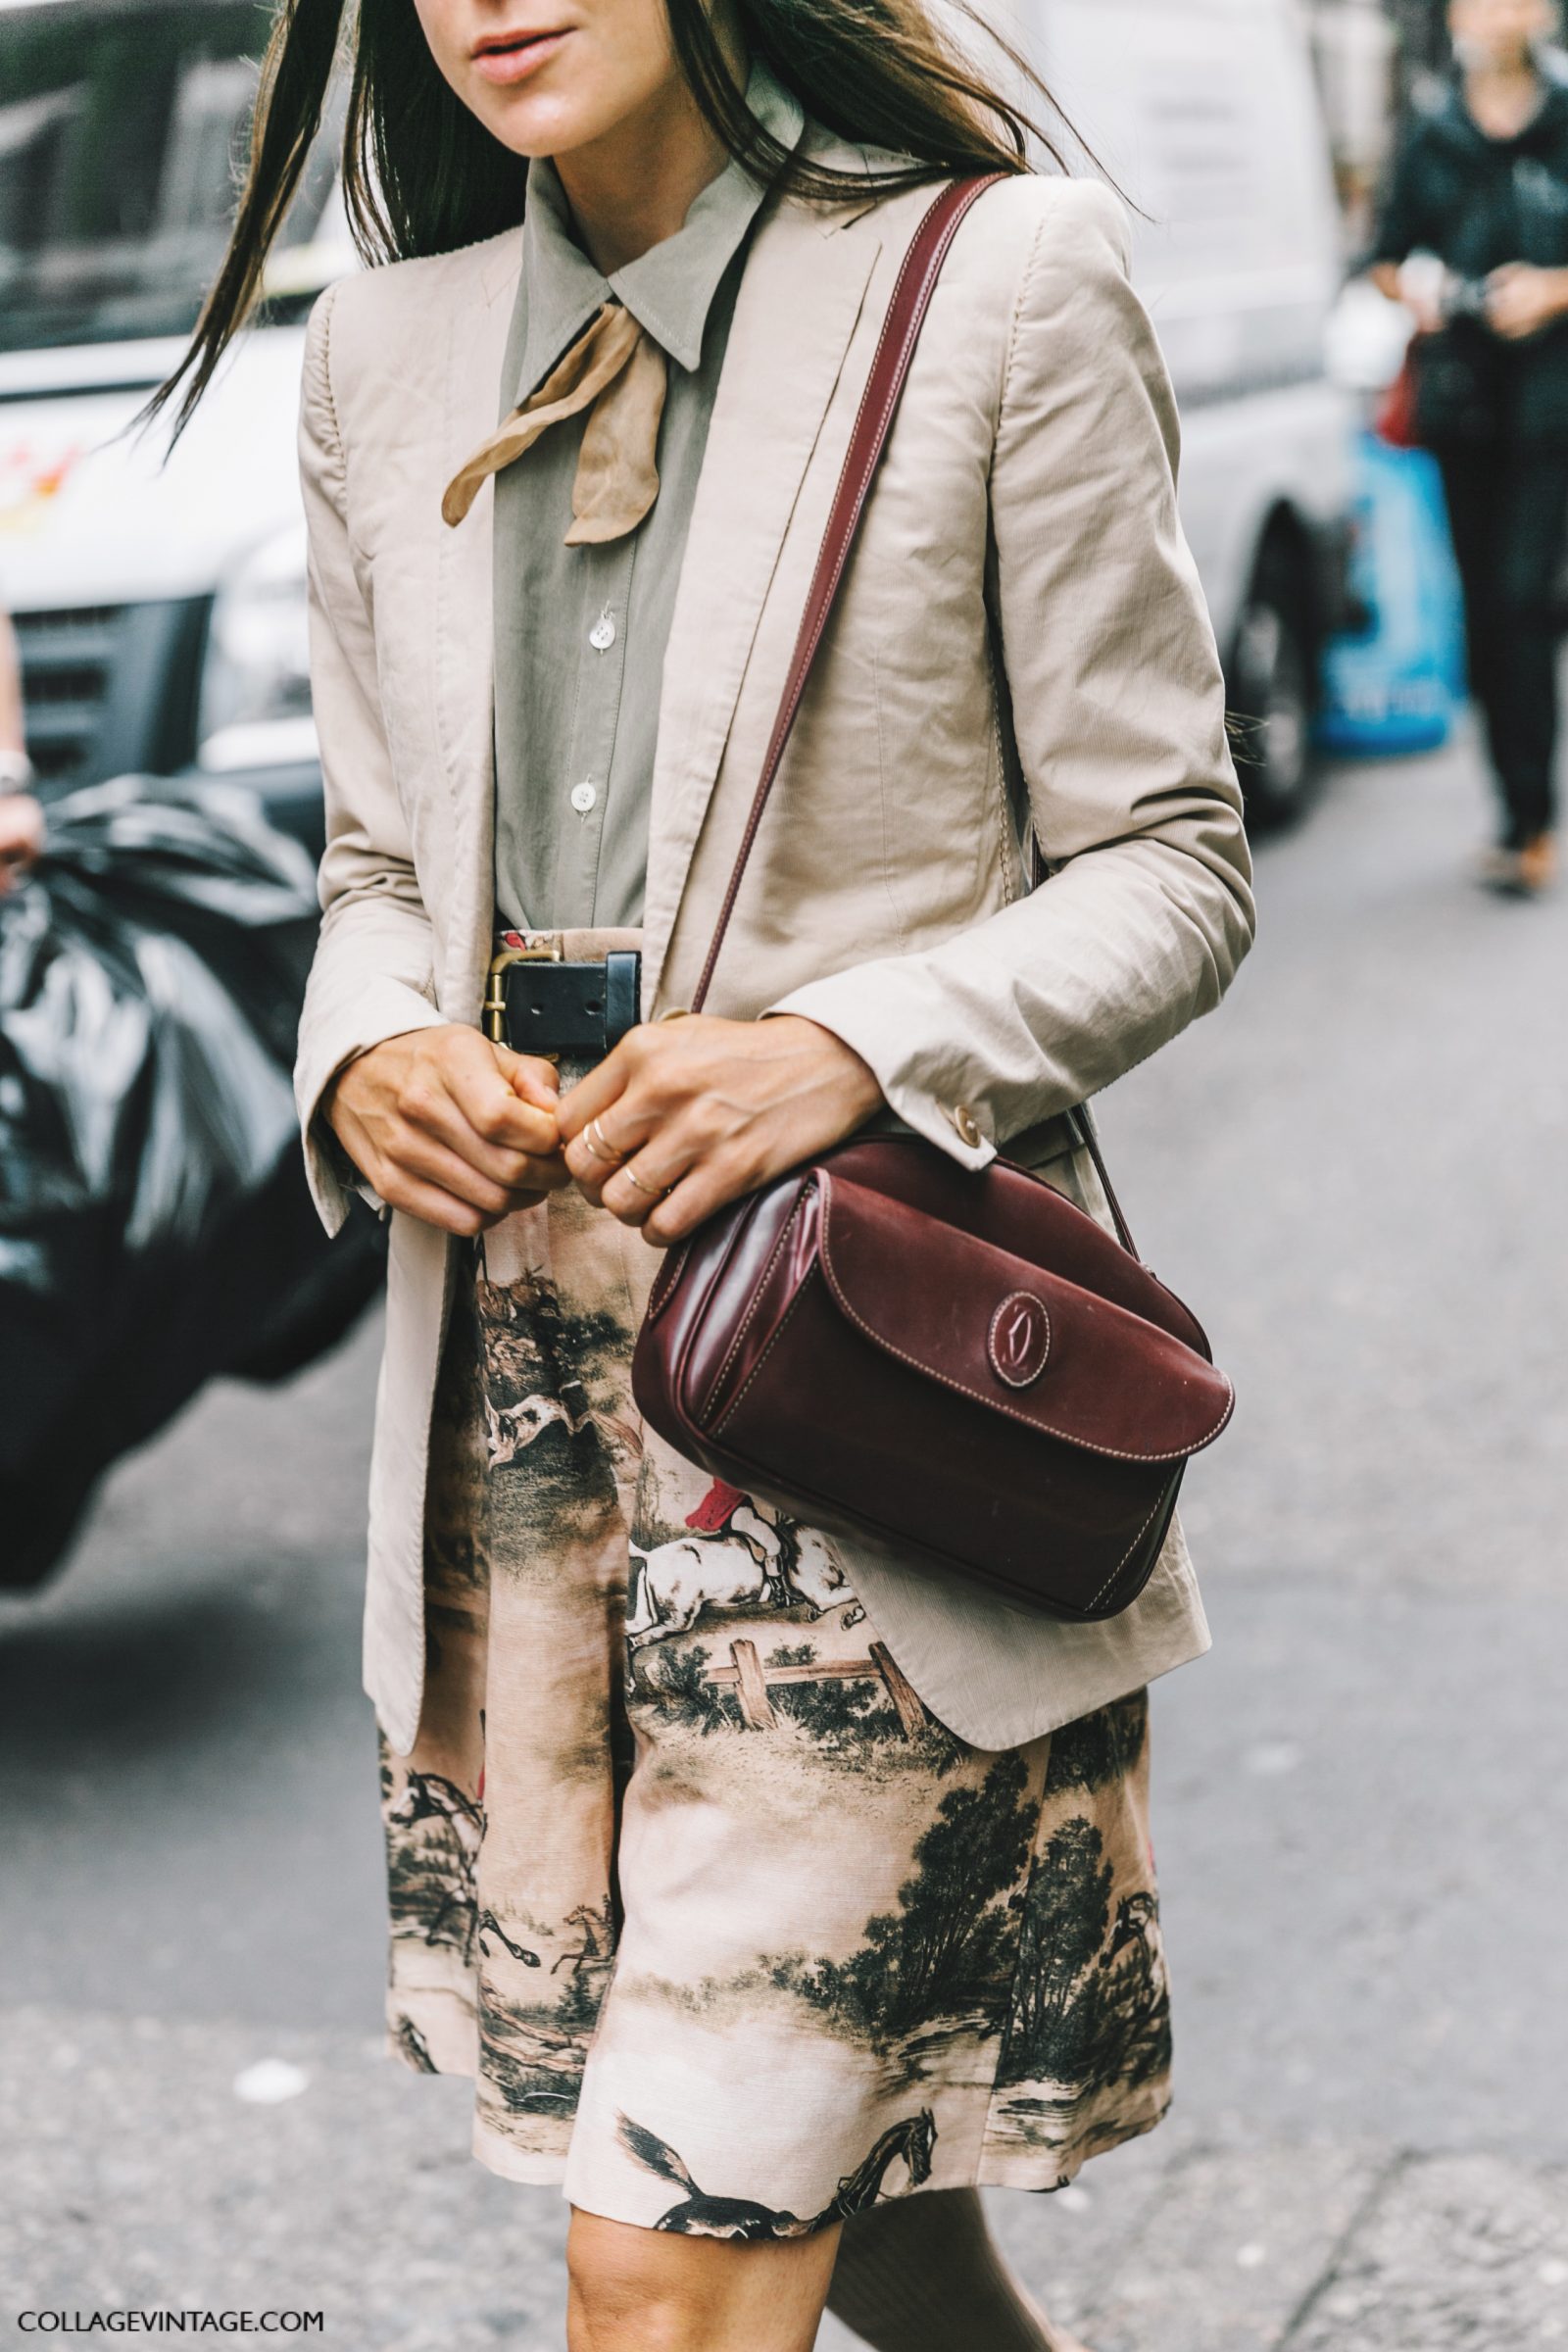 lfw-london_fashion_week_ss17-street_style-outfits-collage_vintage-vintage-topshop_unique-anya-mulberry-preen-130